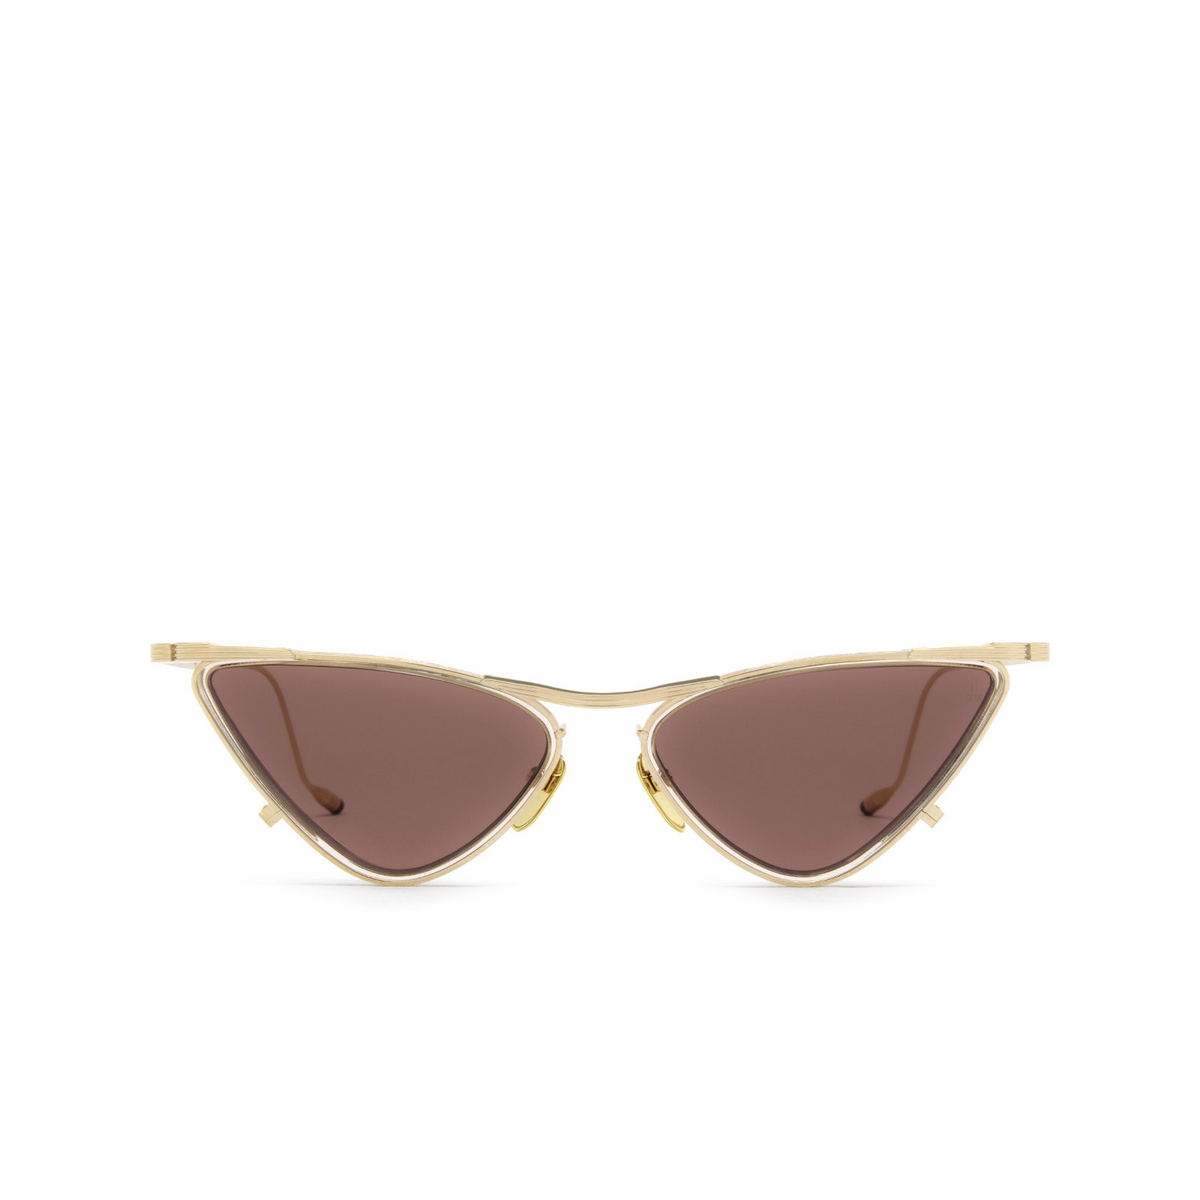 Jacques Marie Mage® Cat-eye Sunglasses: Niki color NUDE 2 - front view